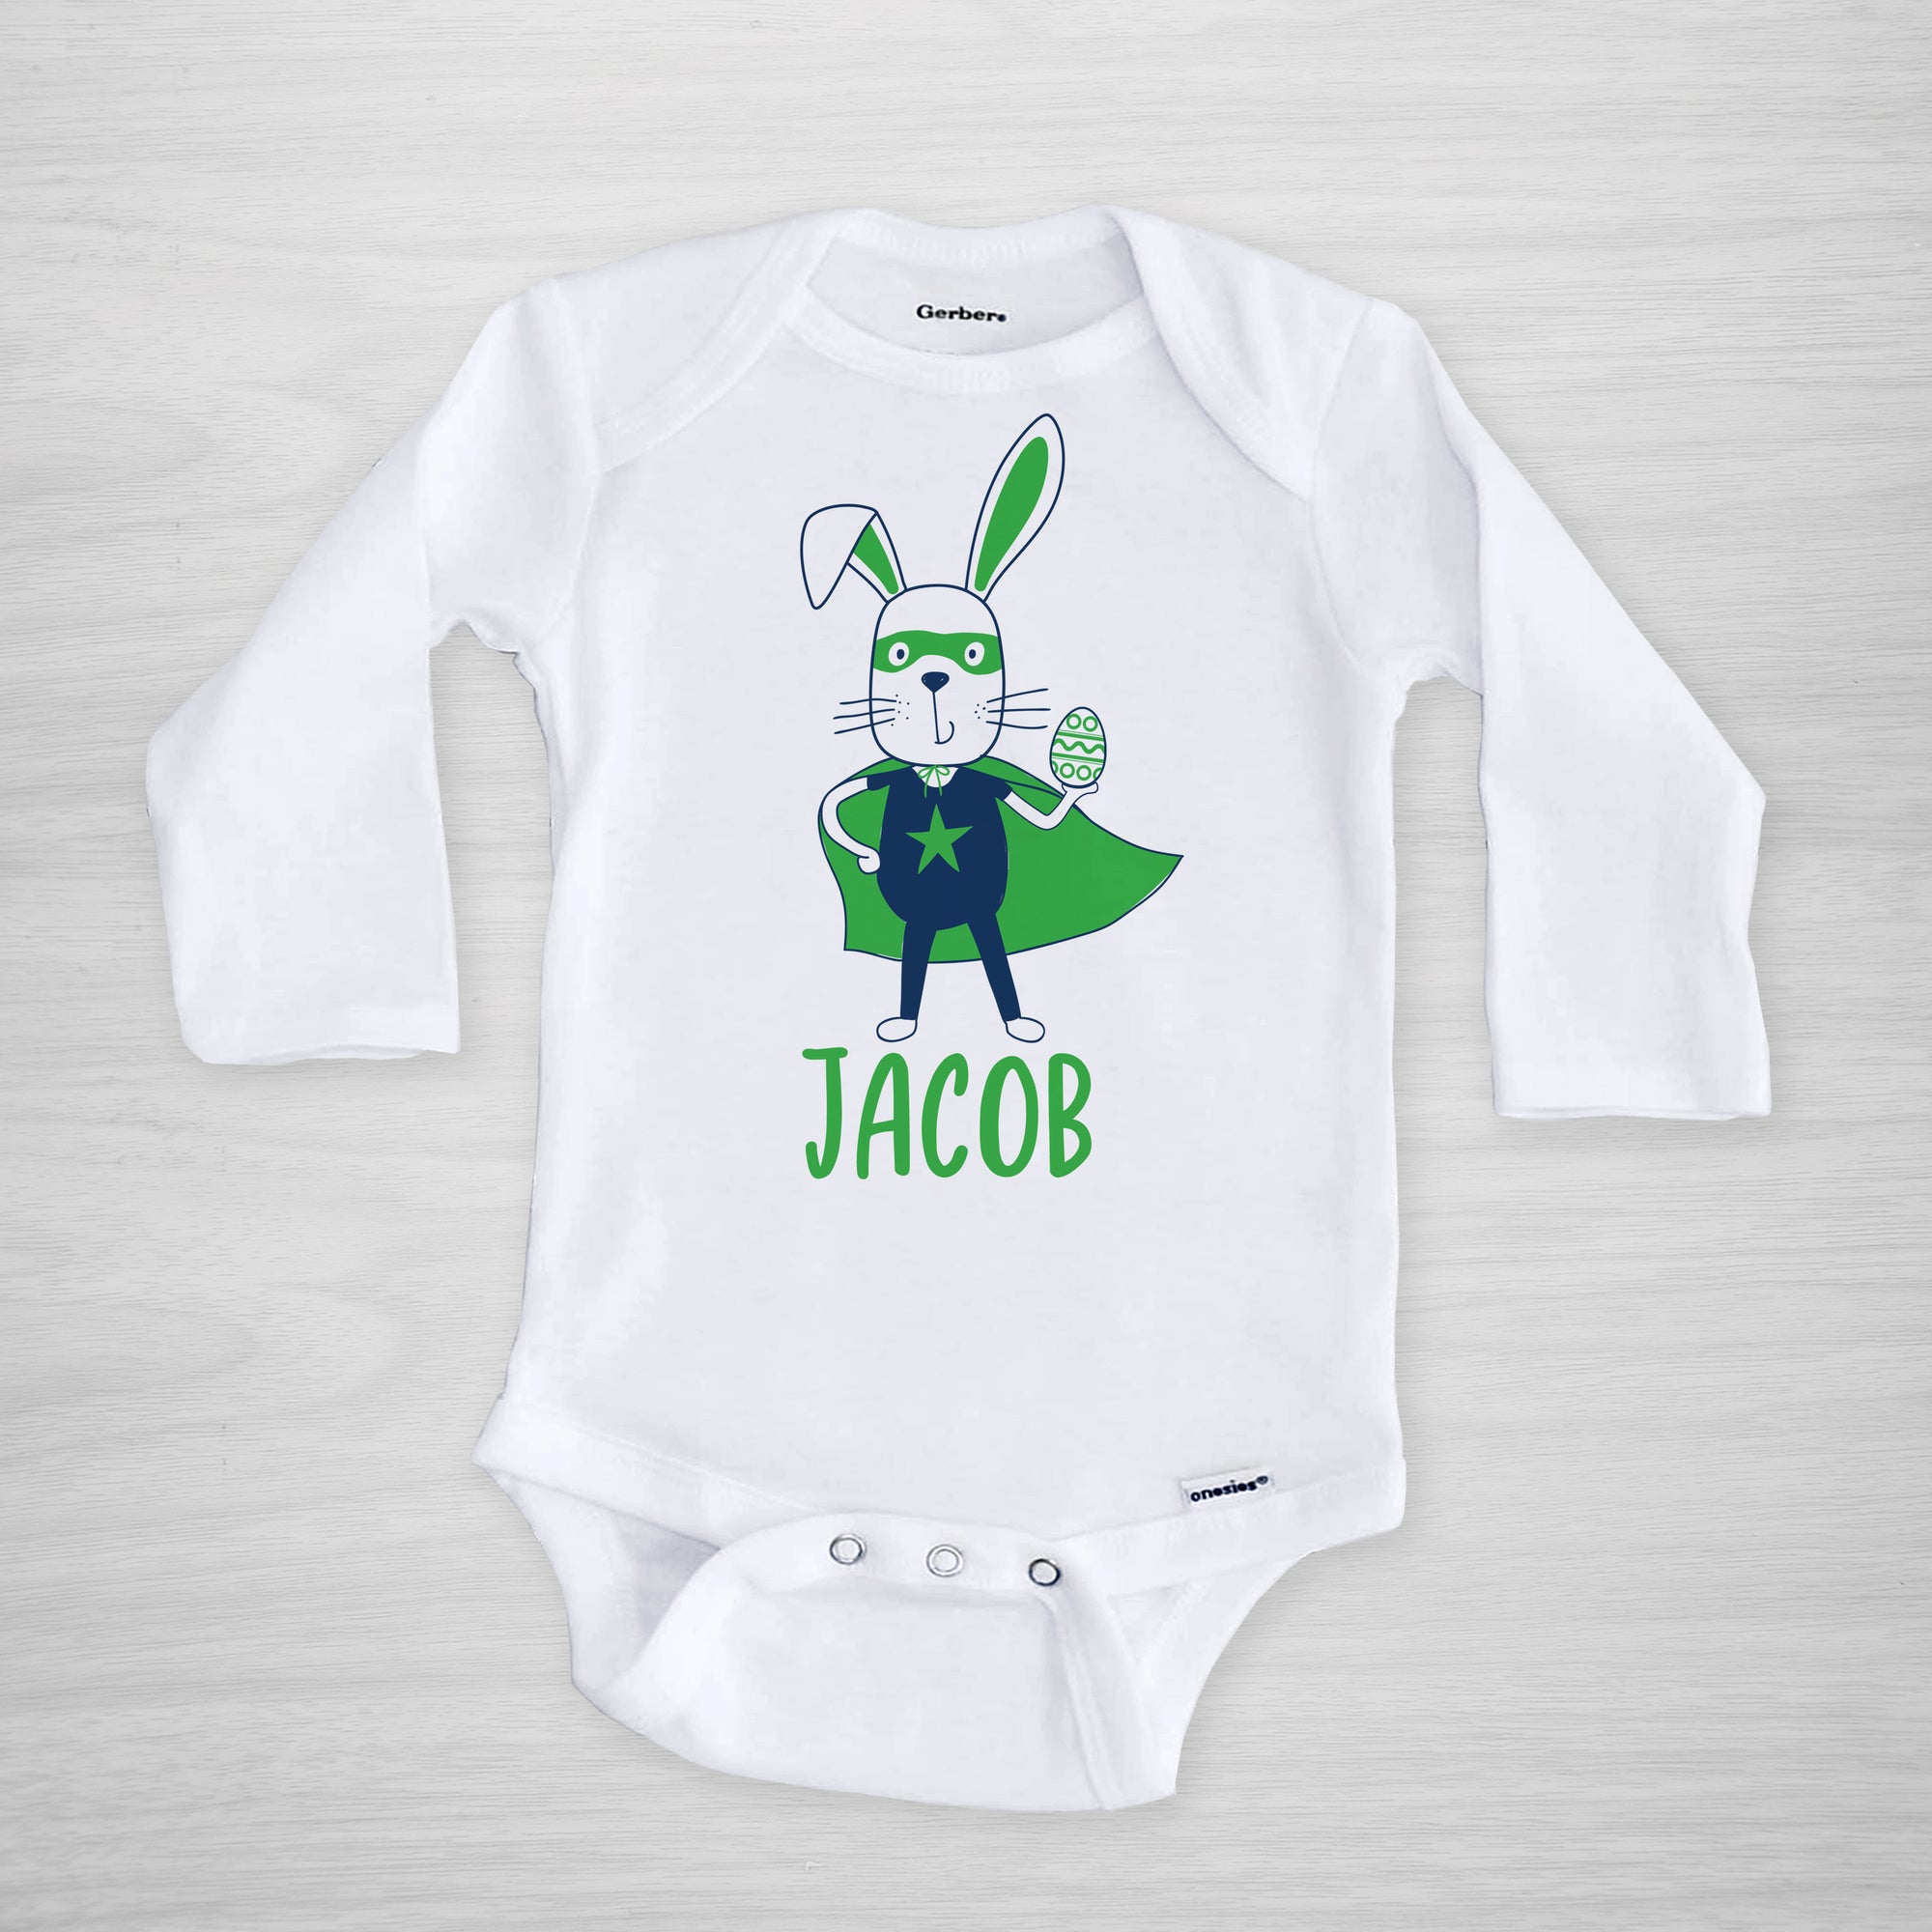 Superhero Easter Bunny with a cape, mask, and egg on this personalized Gerber Onesie®, long sleeved blue